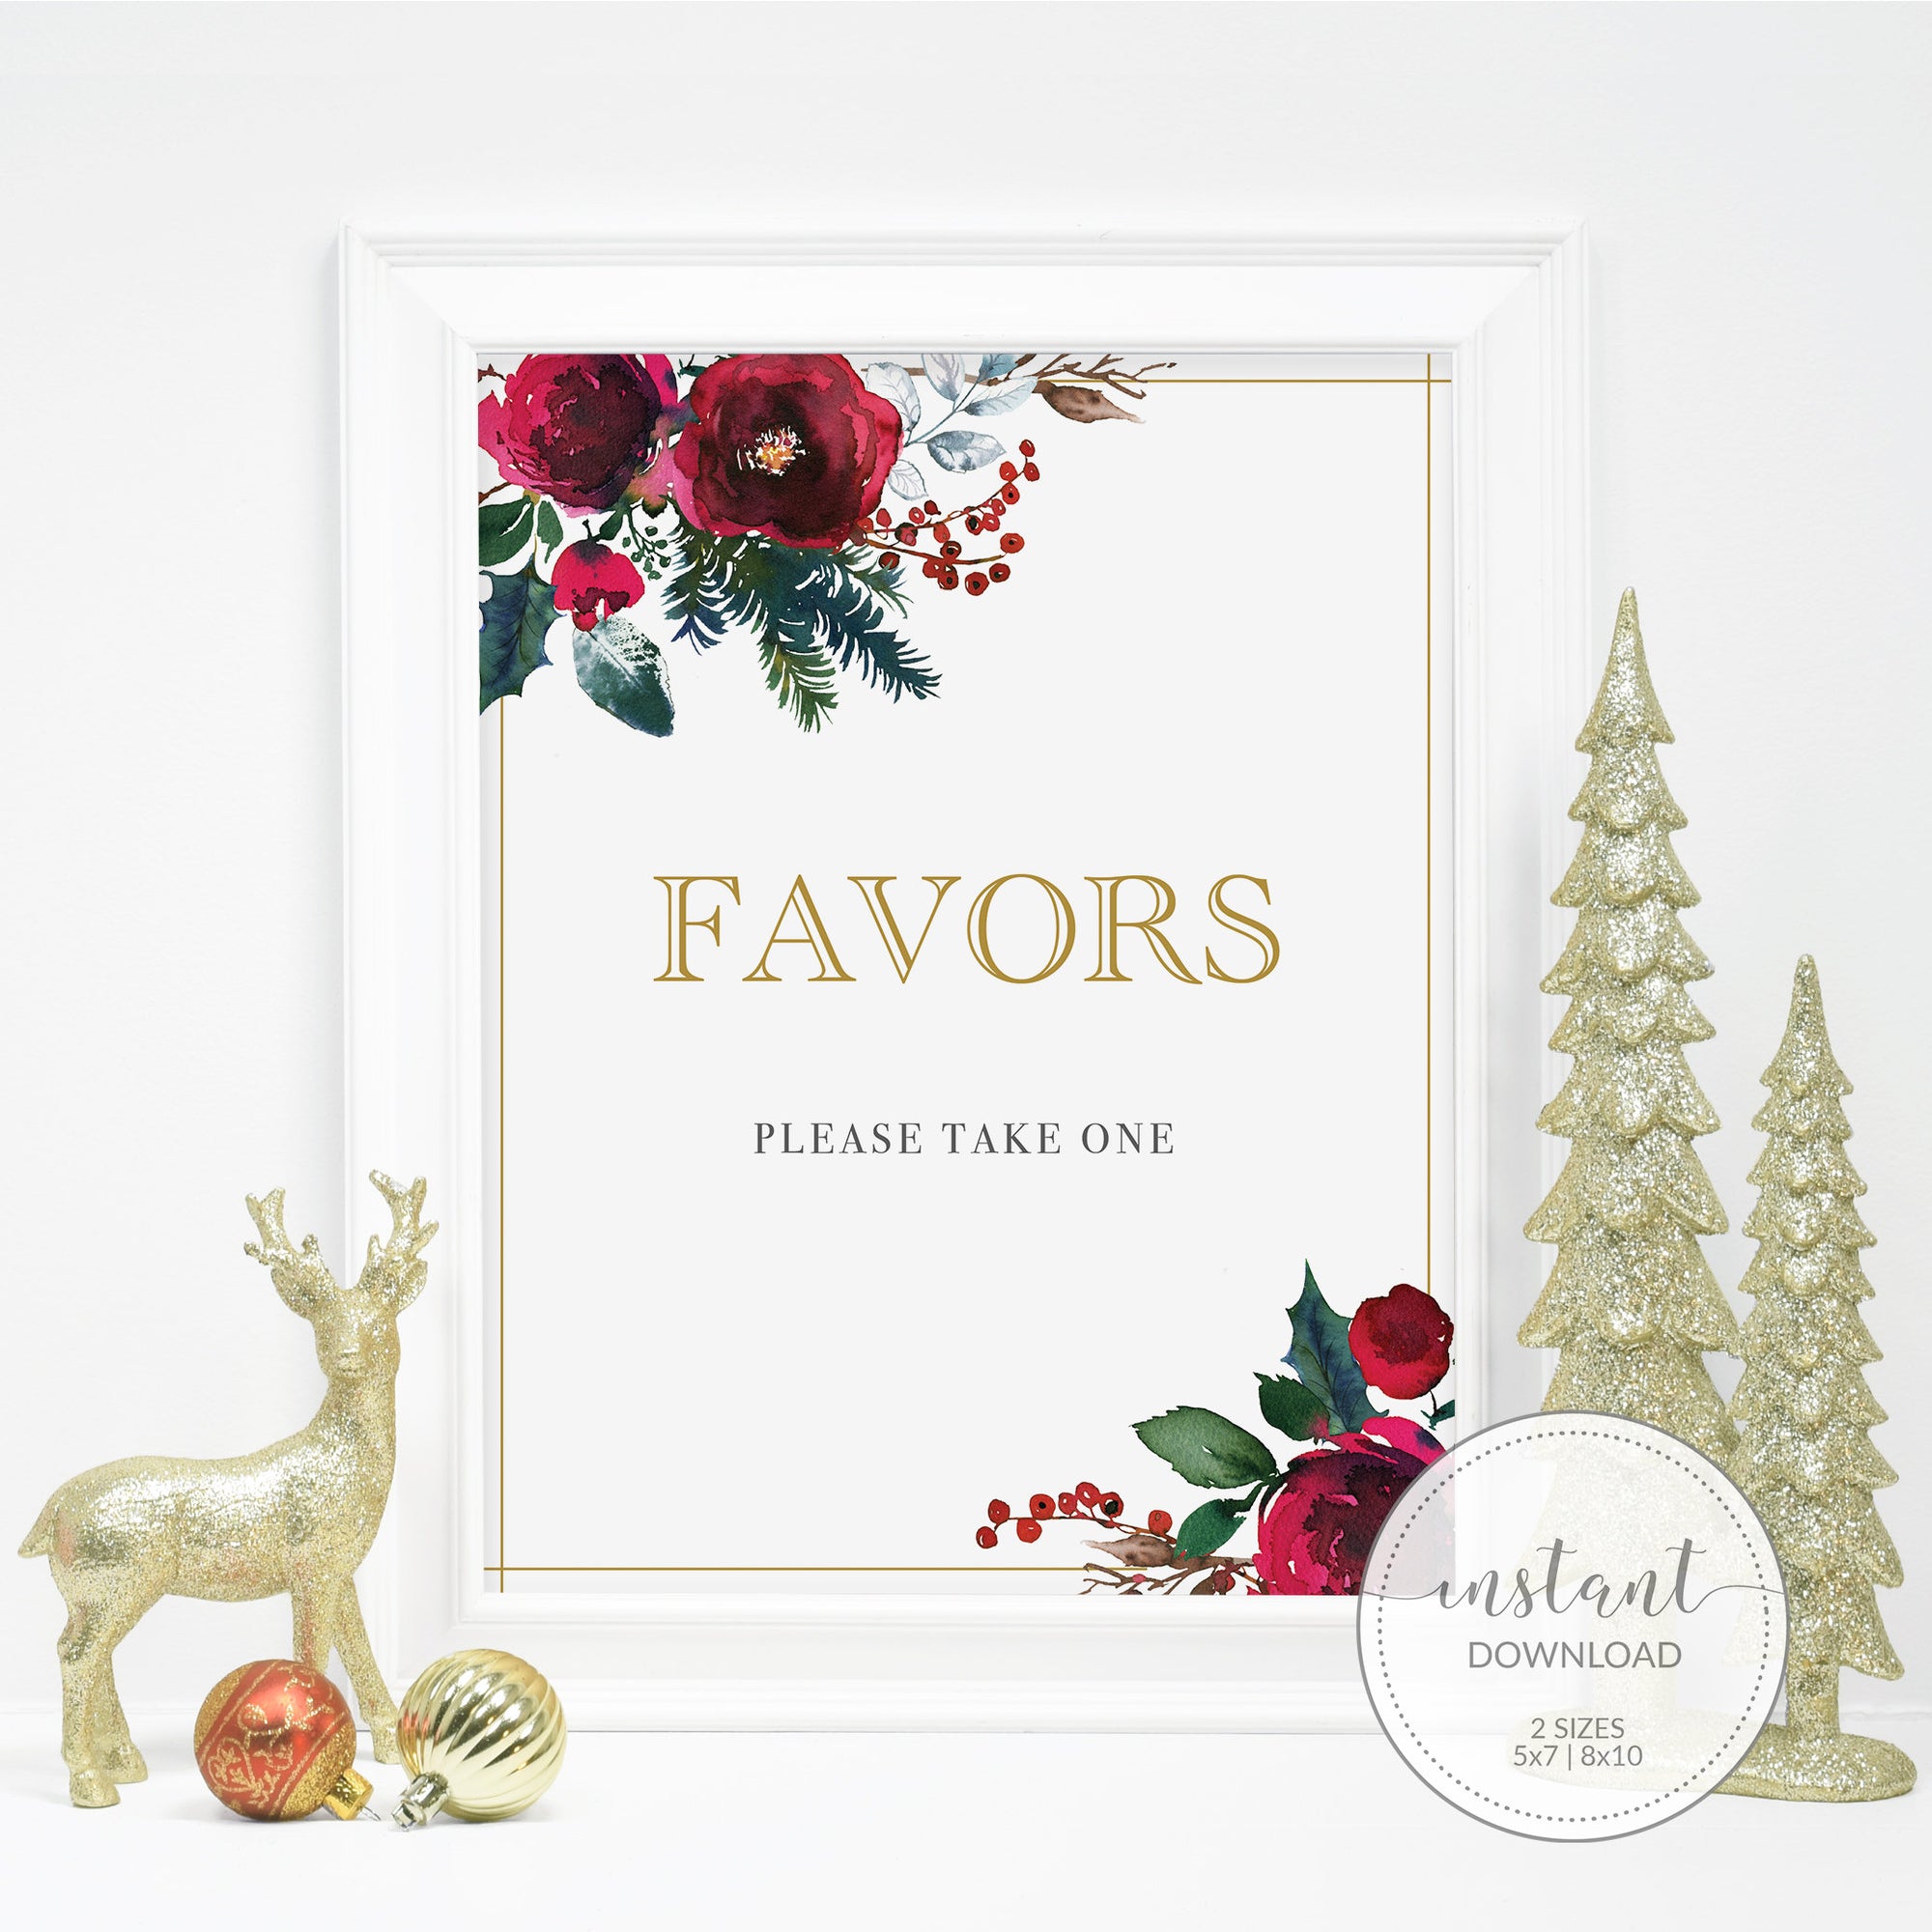 Christmas Party Favors Sign Printable, Holiday Party Printable Decorations, Christmas Bridal Shower Favor Sign, INSTANT DOWNLOAD - CG100 - @PlumPolkaDot 